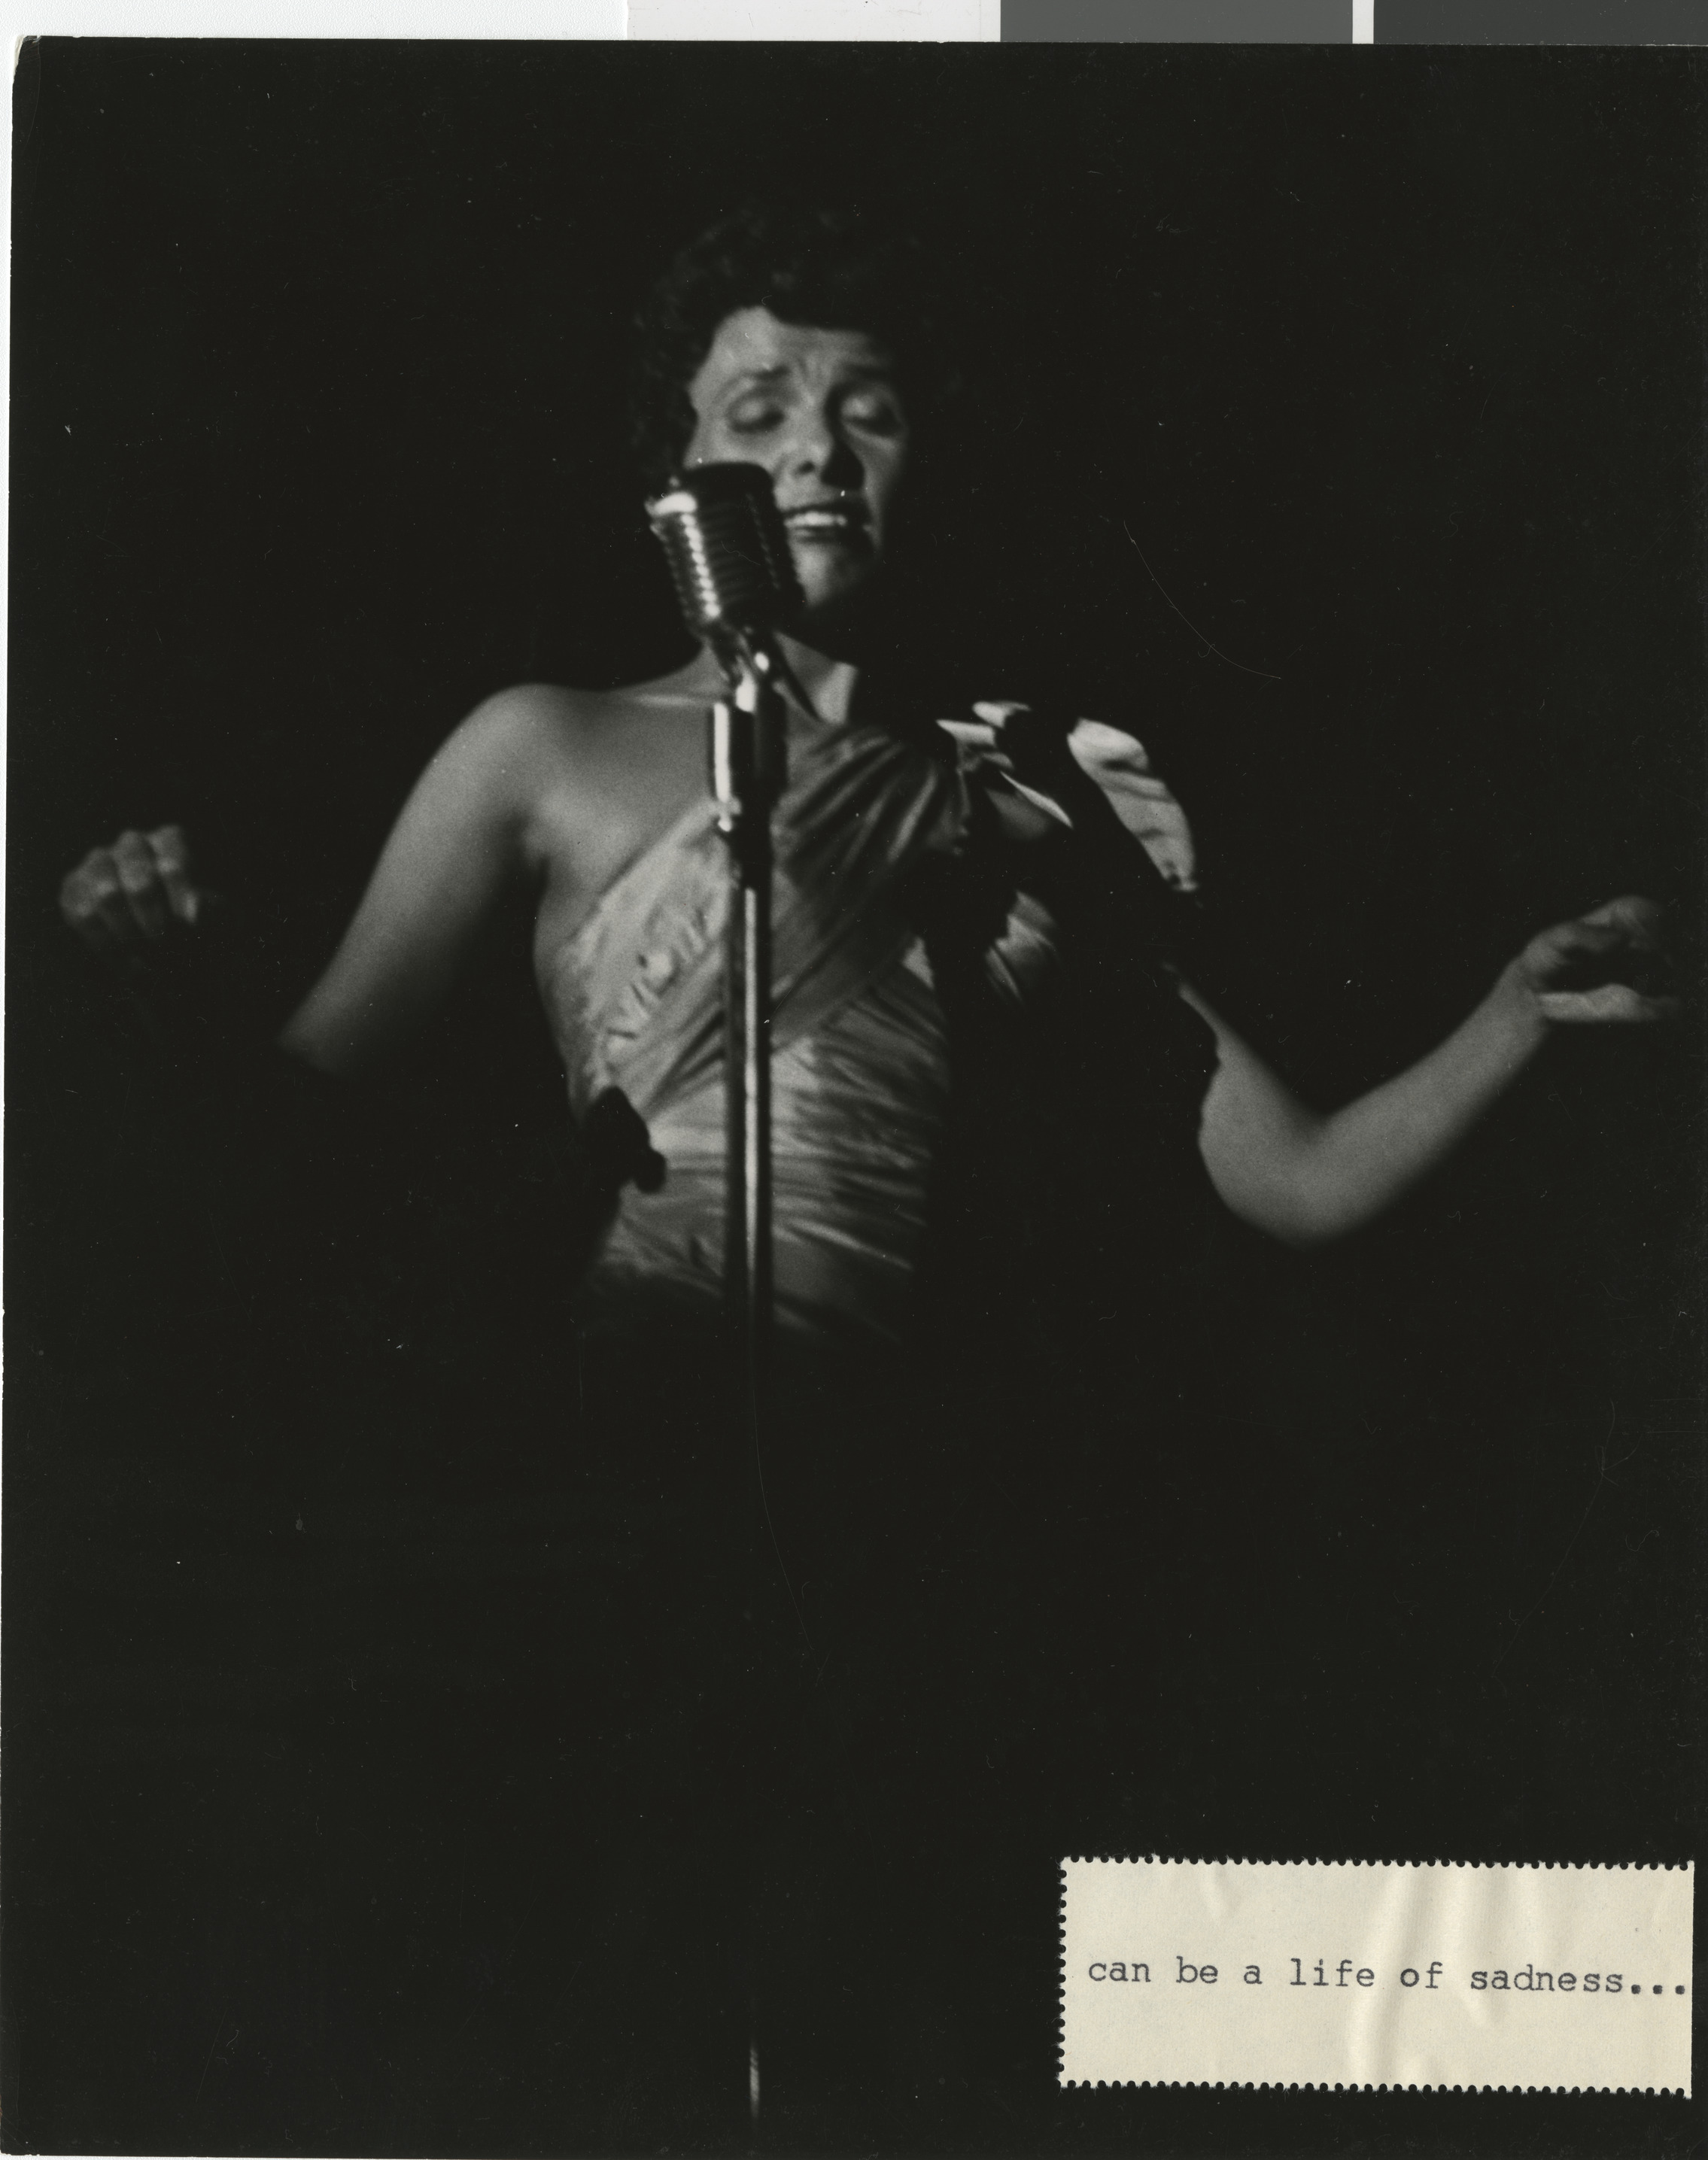 Photograph to accompany story on Lena Horne, pitched to various print magazines